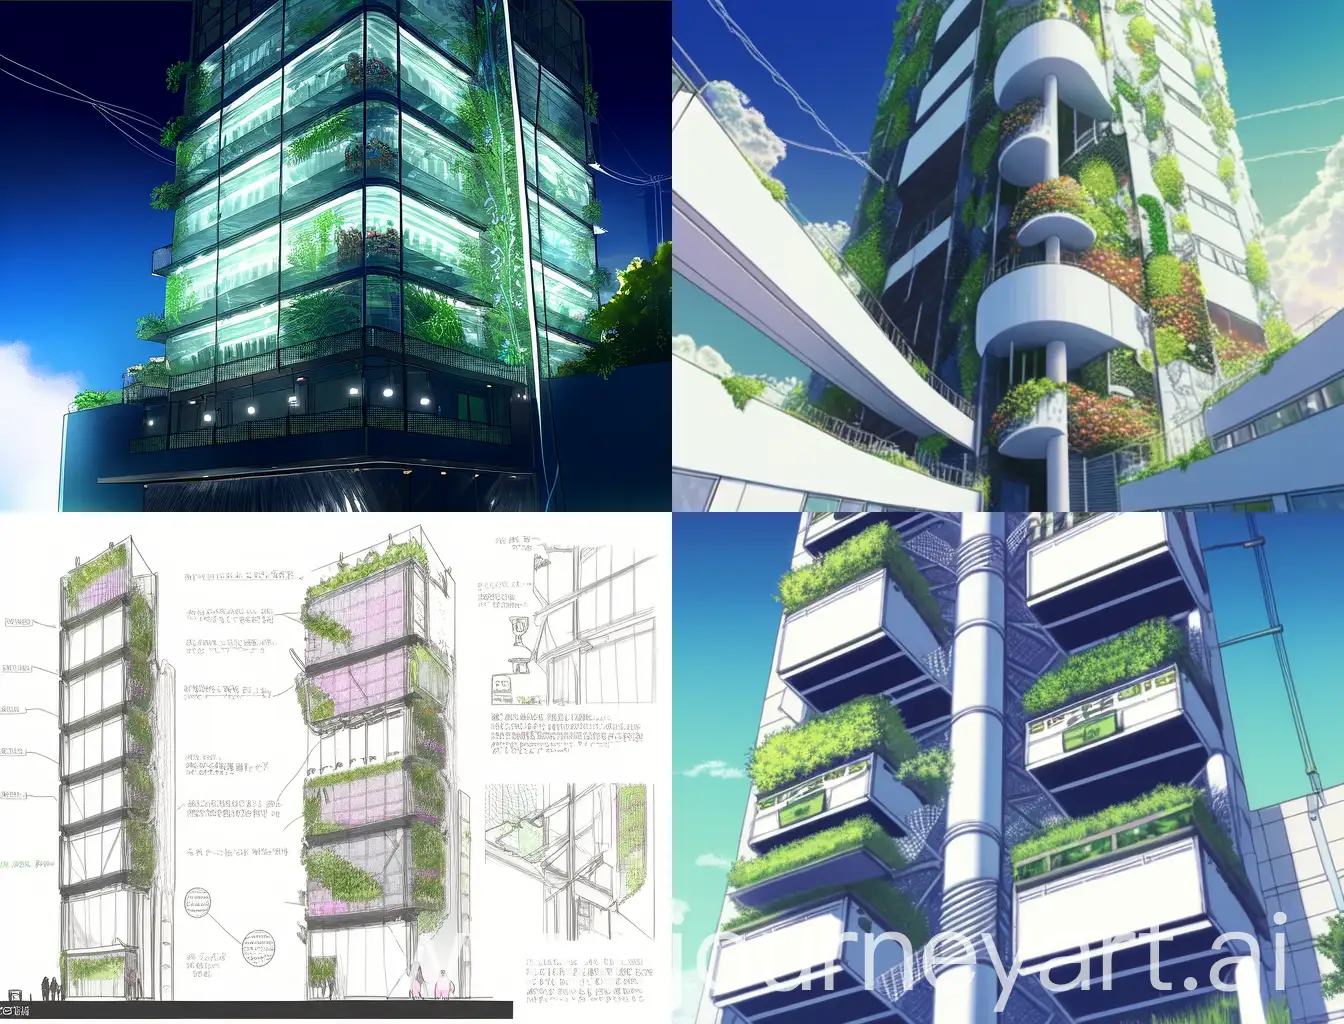 Urban-Vertical-Hydroponic-Tower-Installation-on-Building-Facade